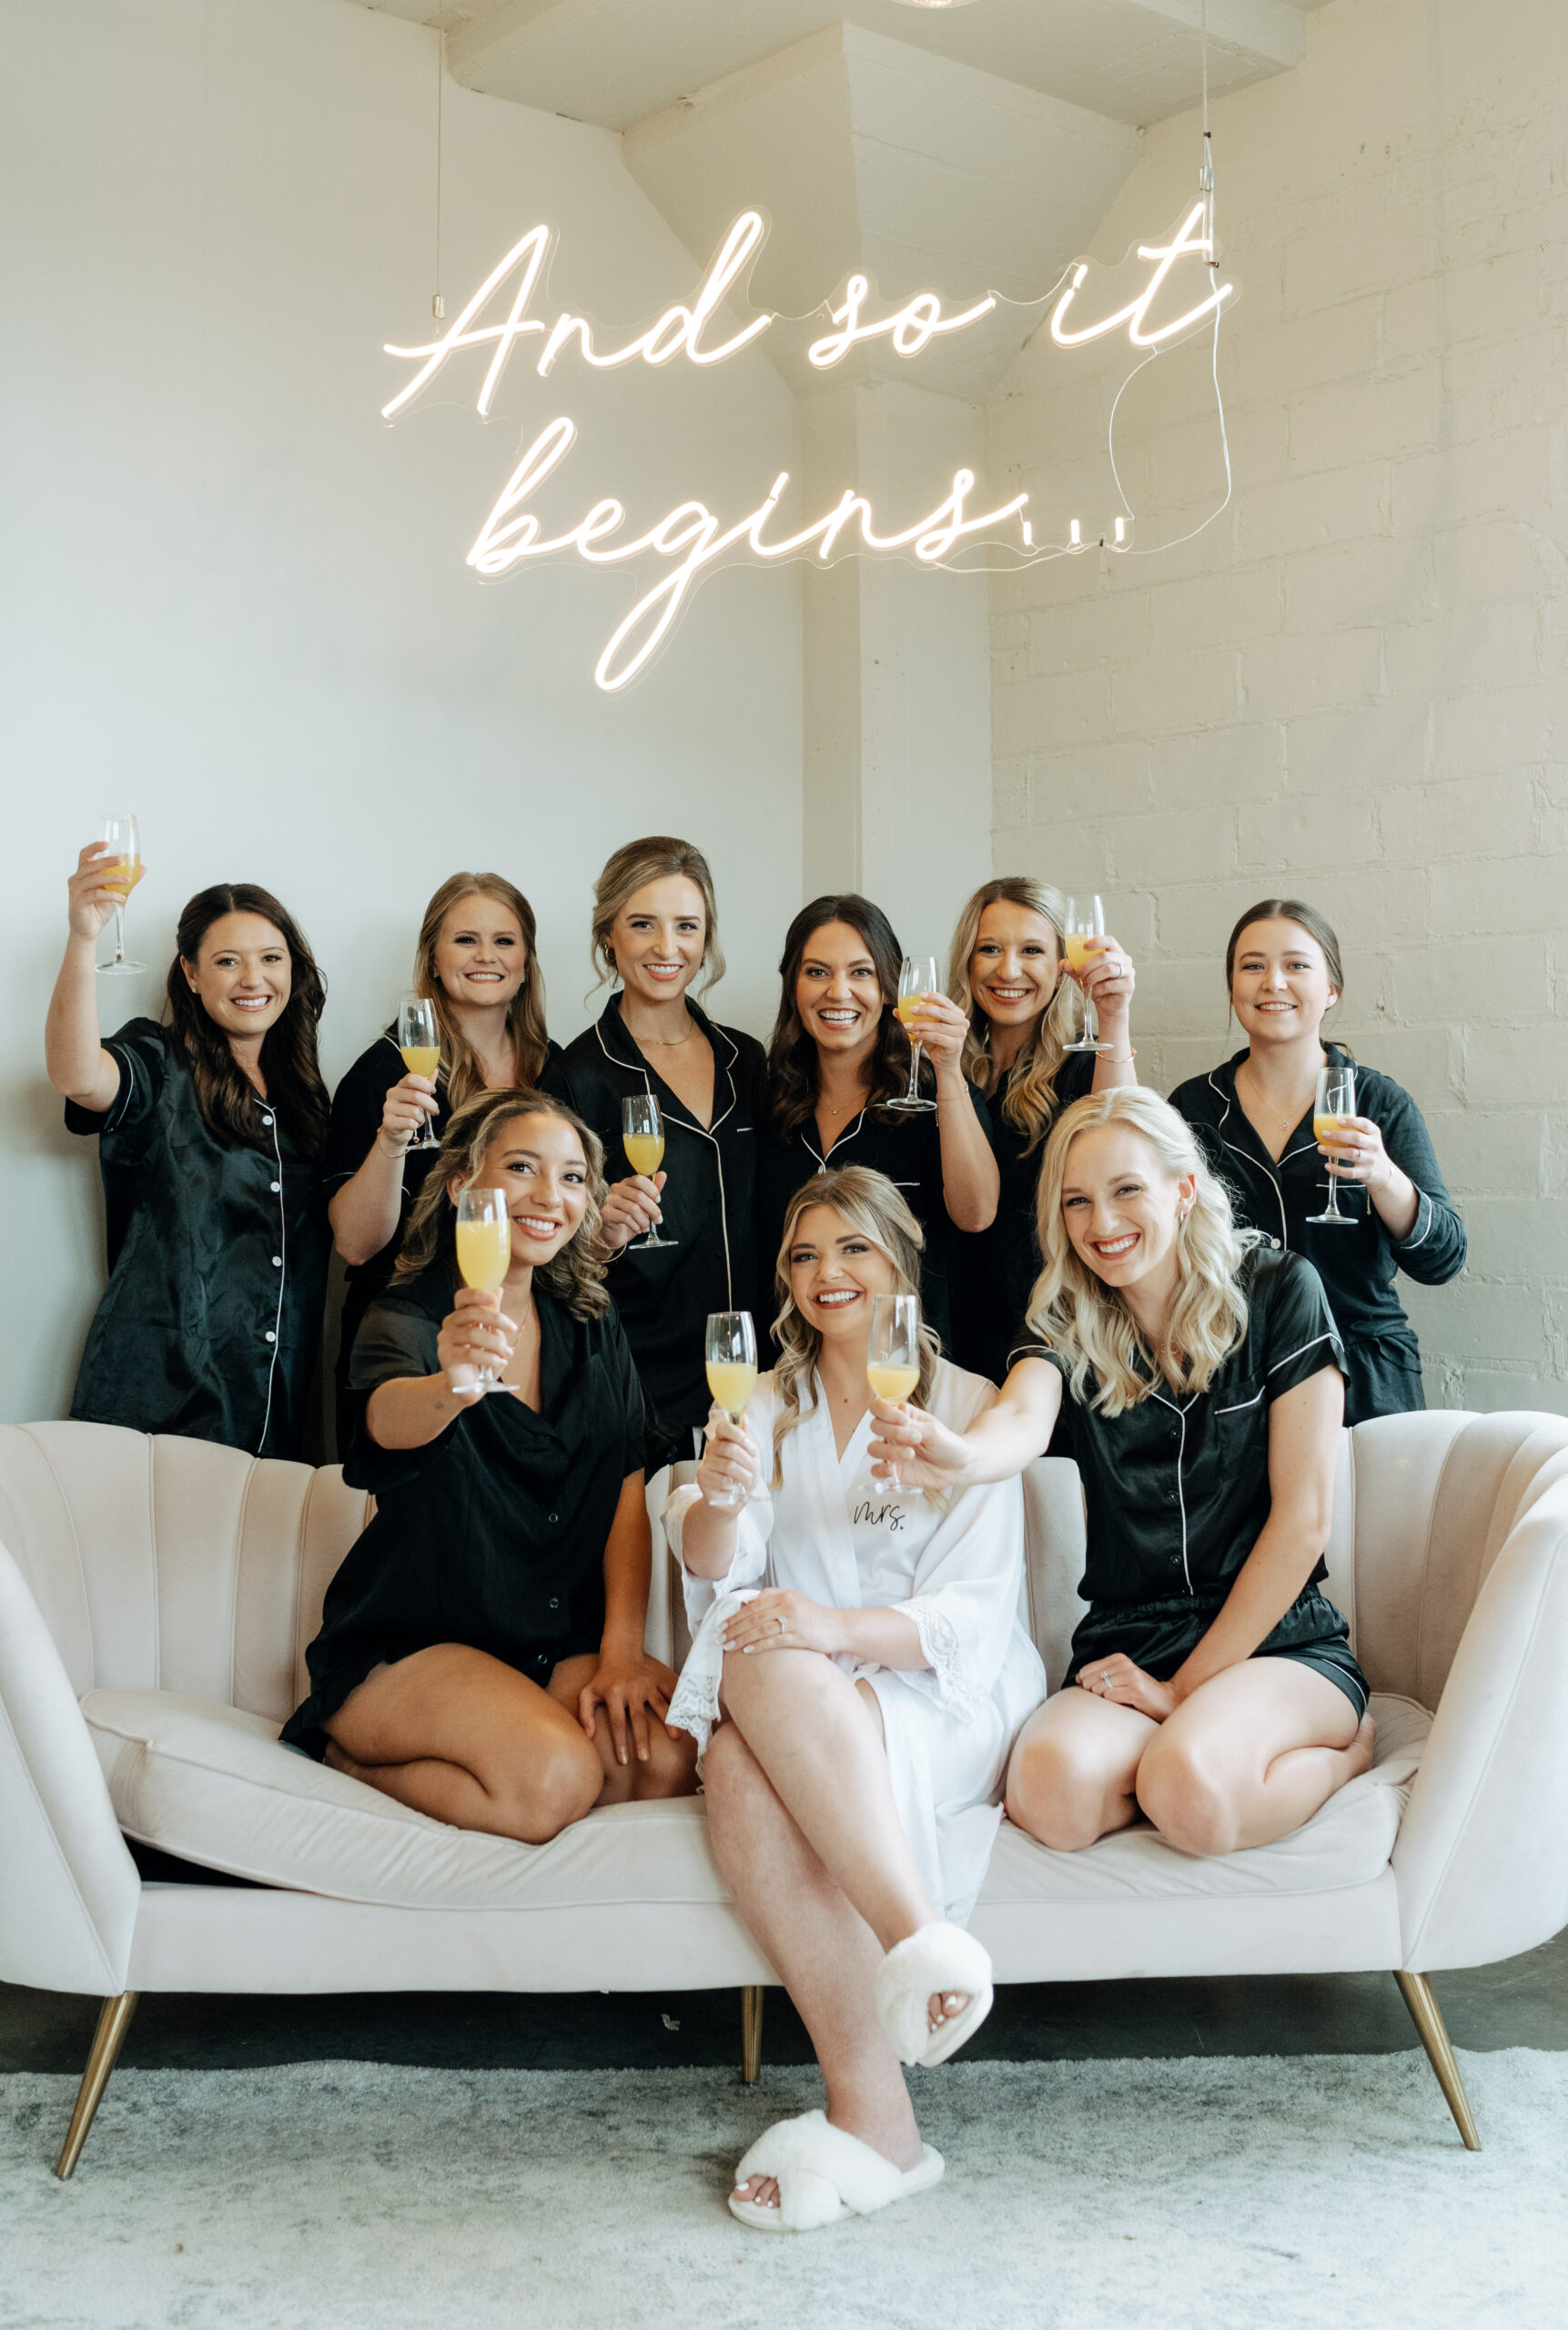 This is a picture of bridesmaids and a bride drinking champagne